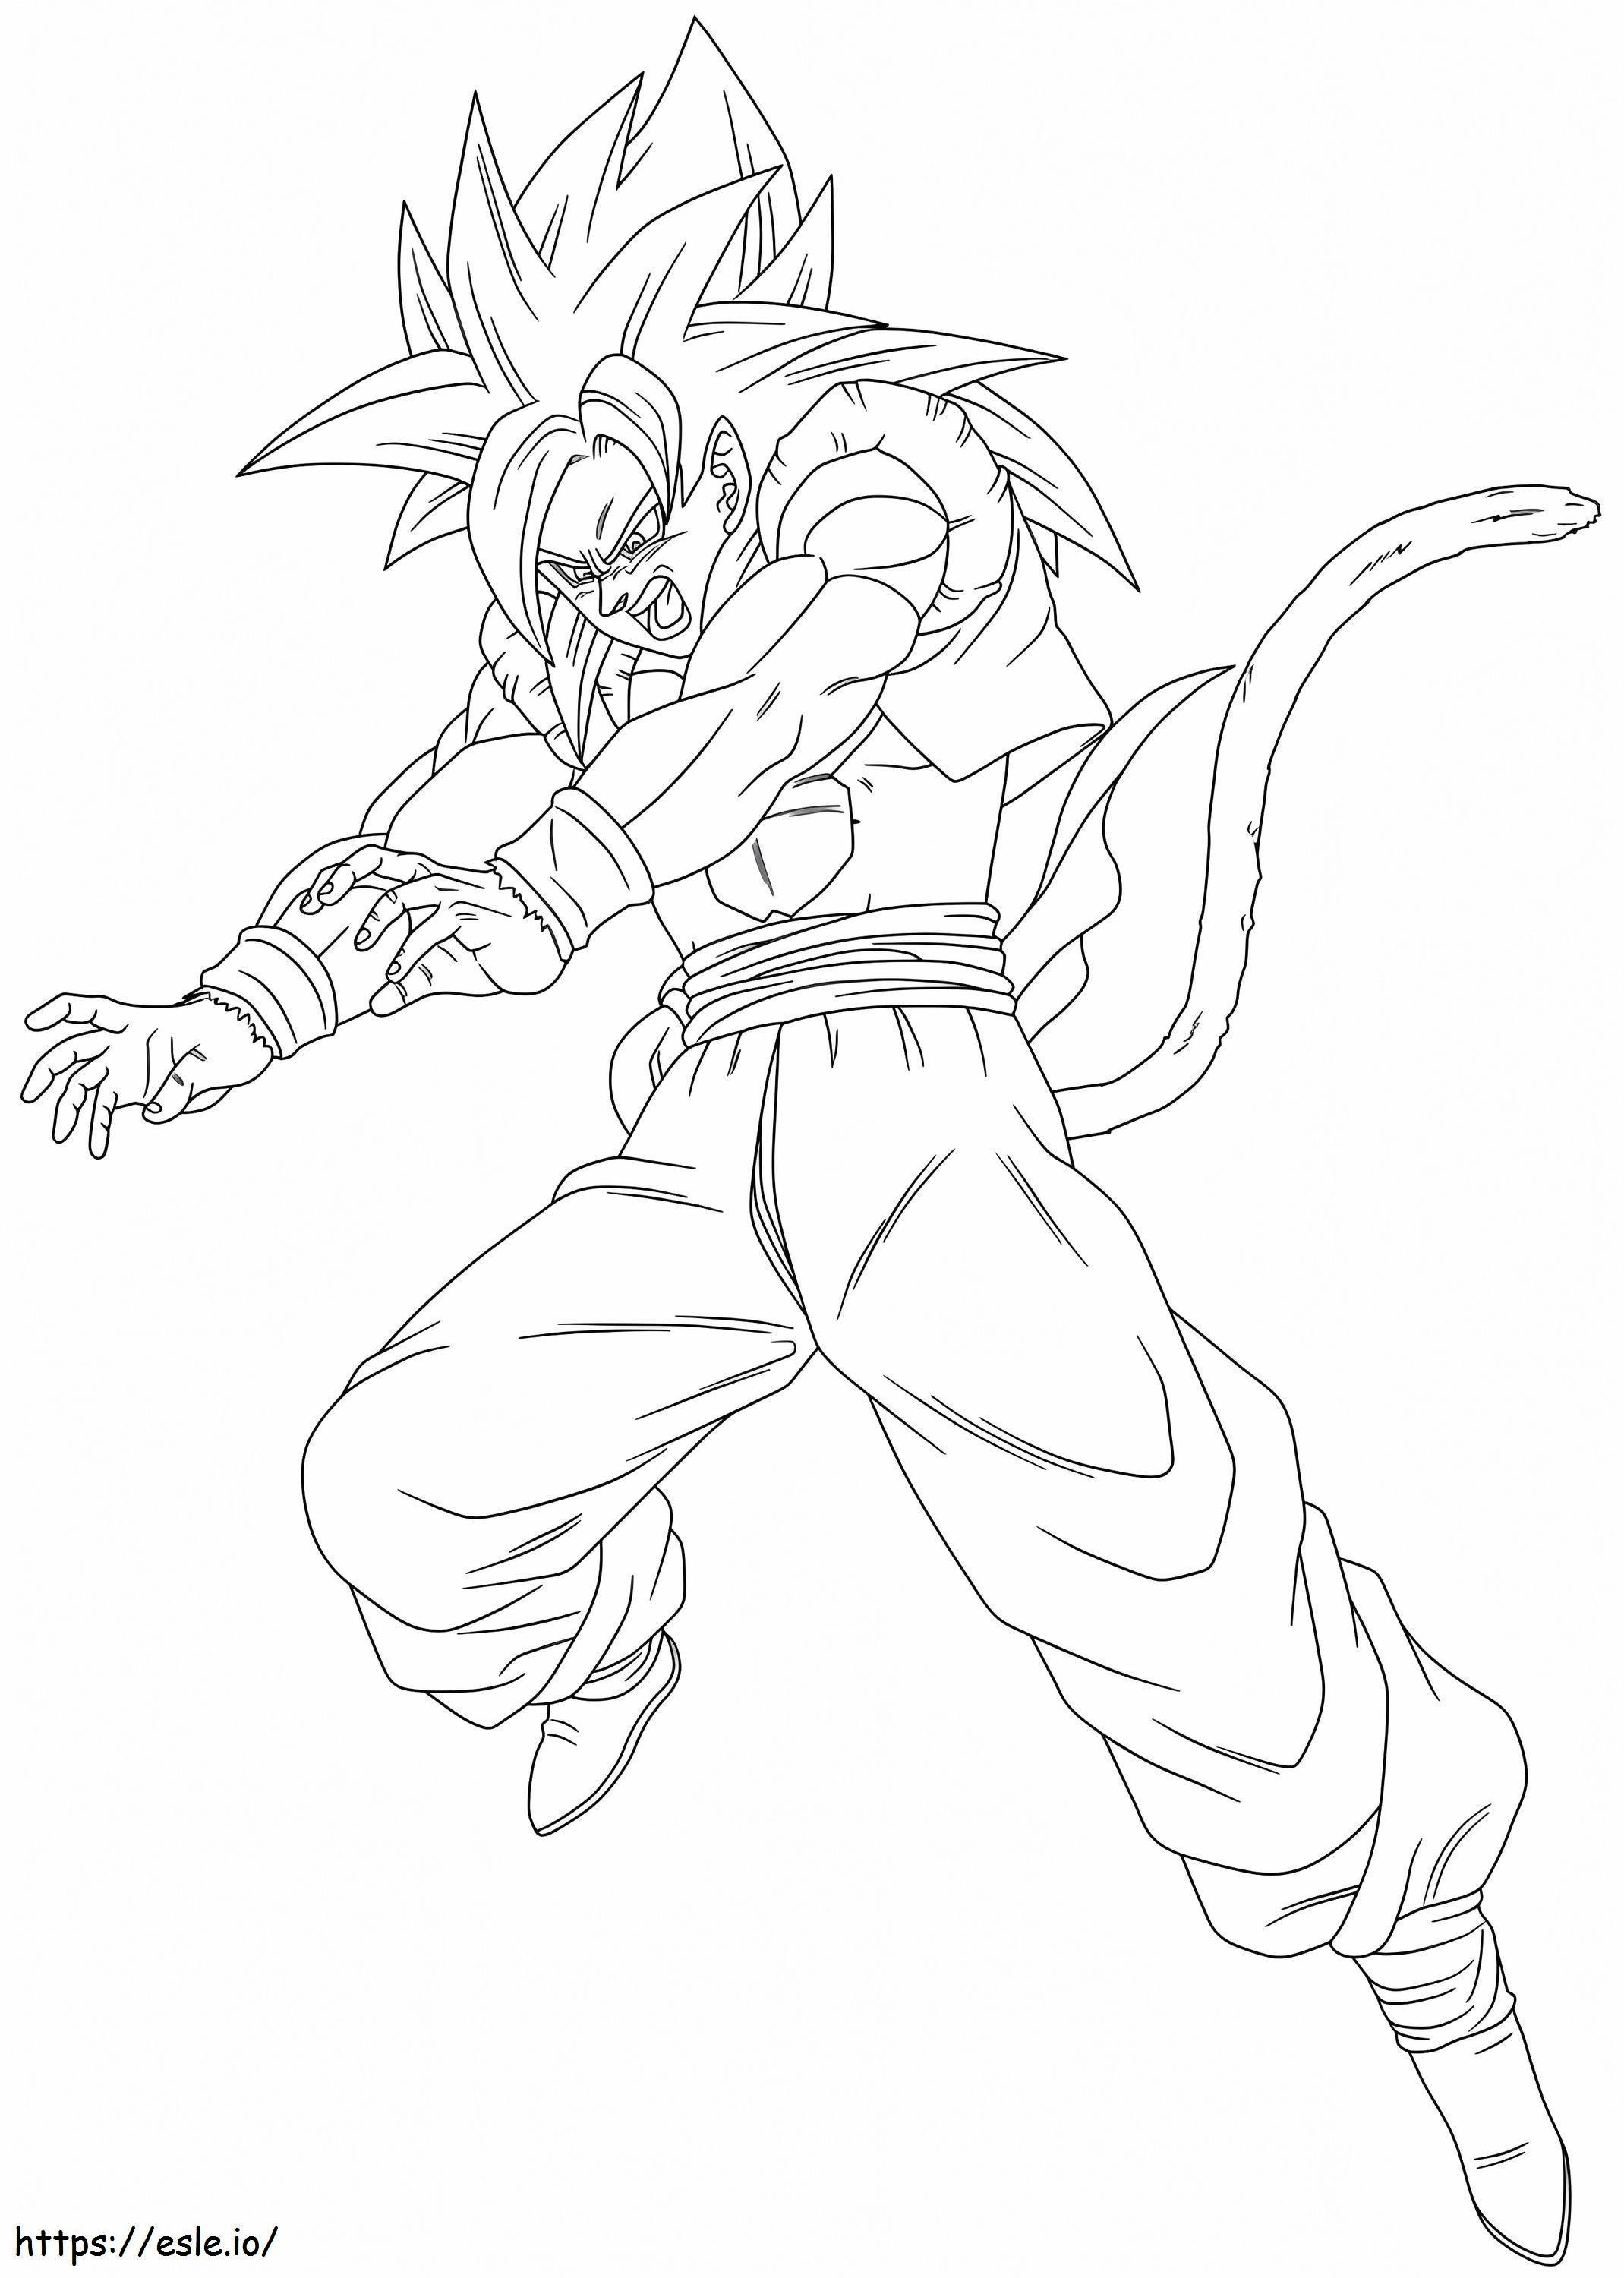 1594775846 Drawing Dbz Gogeta 4 coloring page